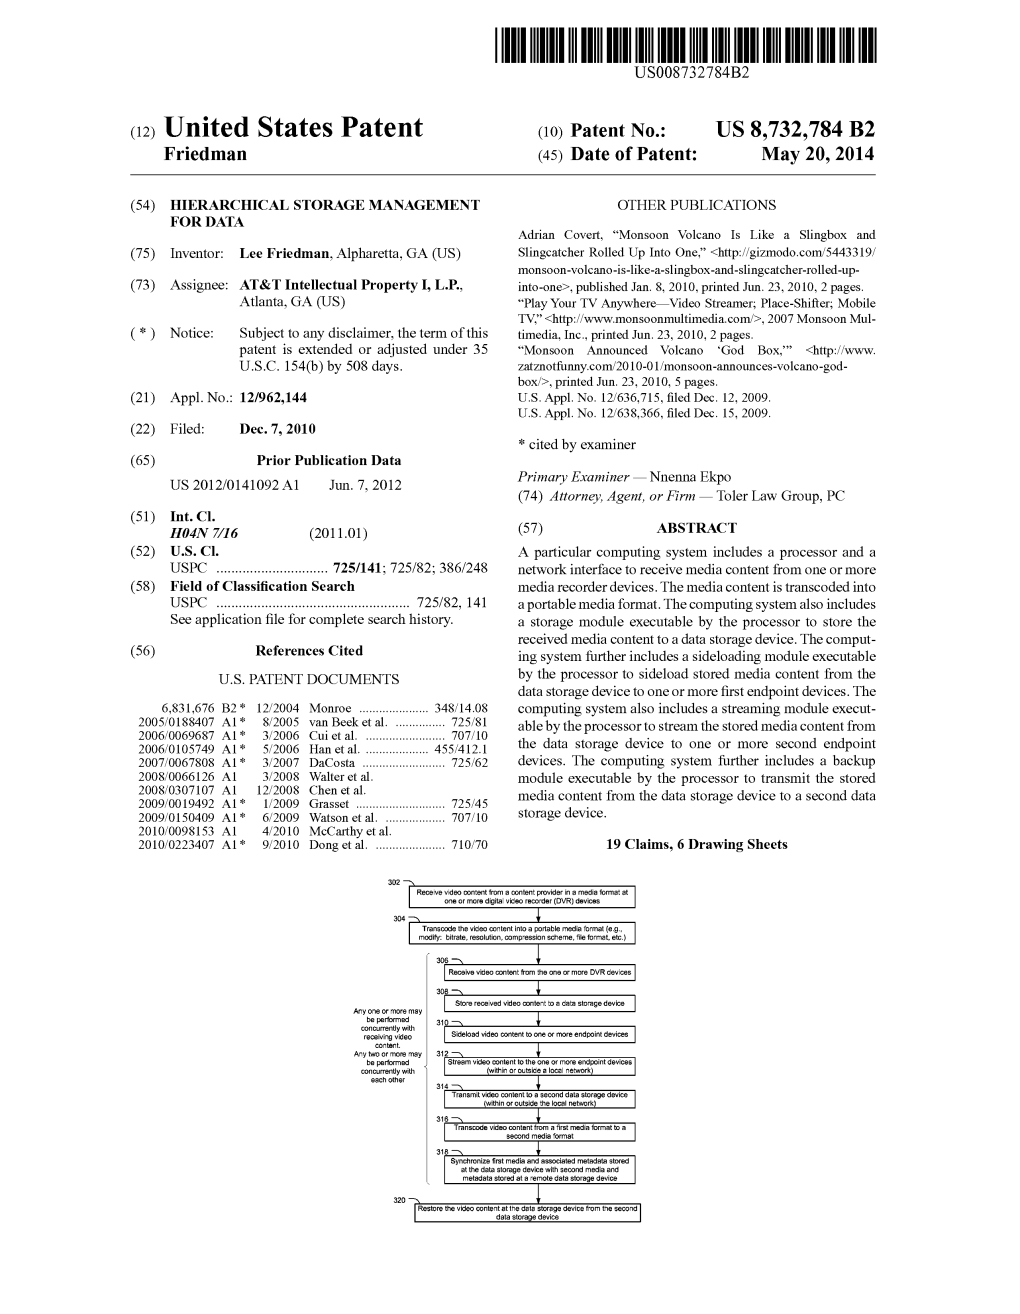 (12) United States Patent (10) Patent N0.: US 8,732,784 B2 Friedman (45) Date of Patent: May 20, 2014